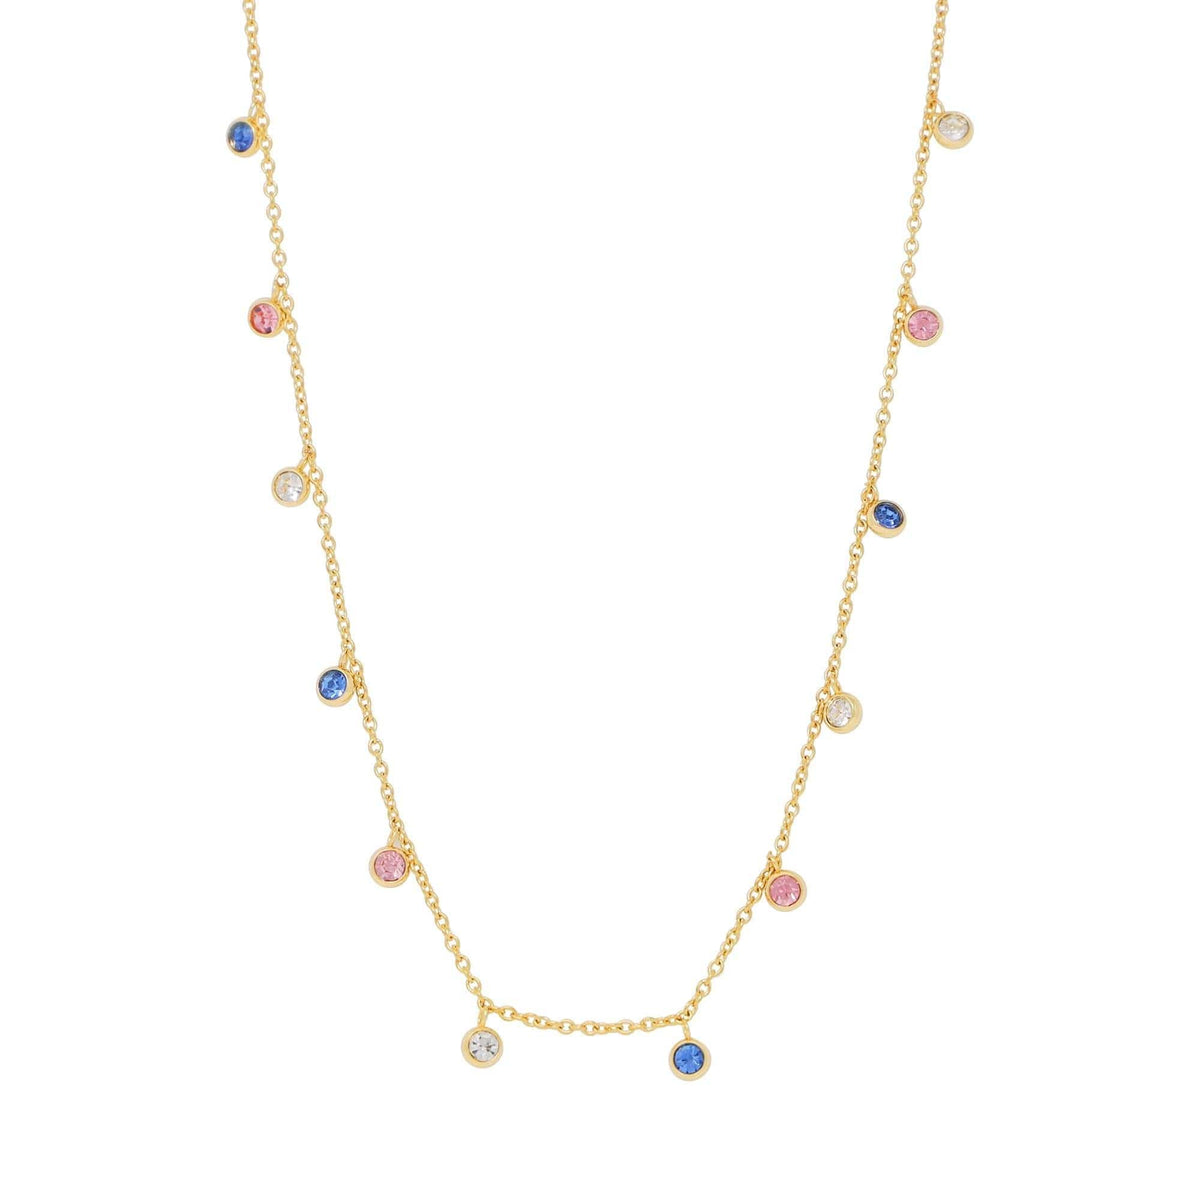 BohoMoon Stainless Steel Kaia Necklace Gold